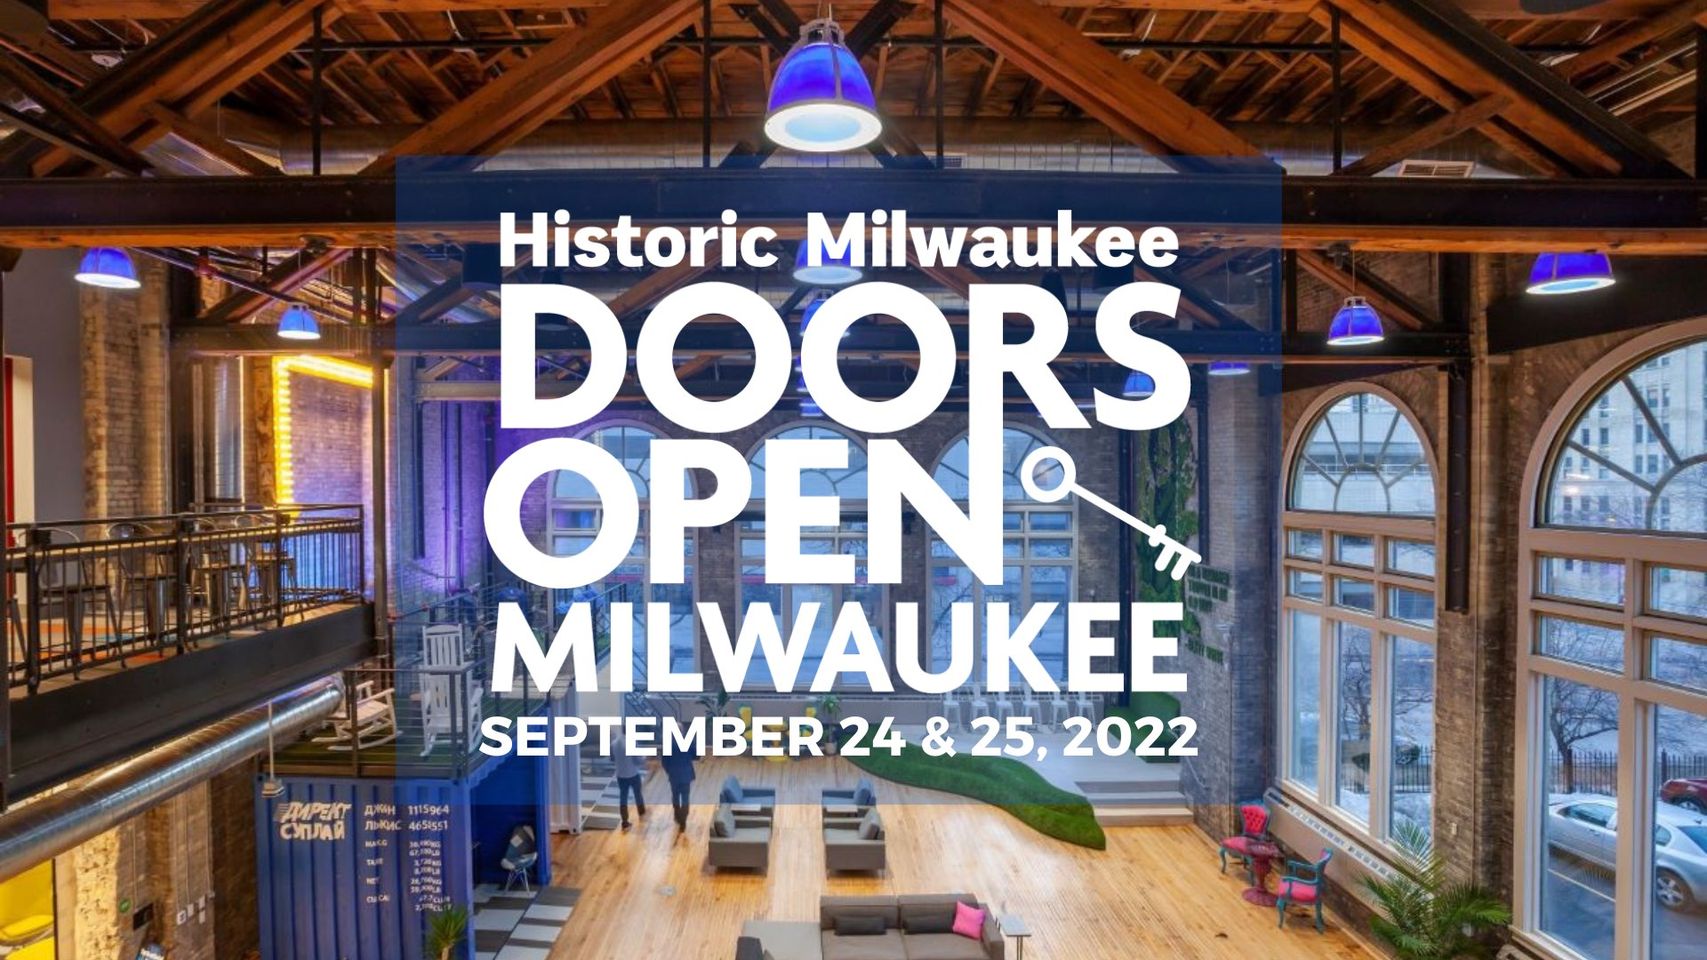 You are currently viewing Doors Open Milwaukee Sep 24-25, 2022